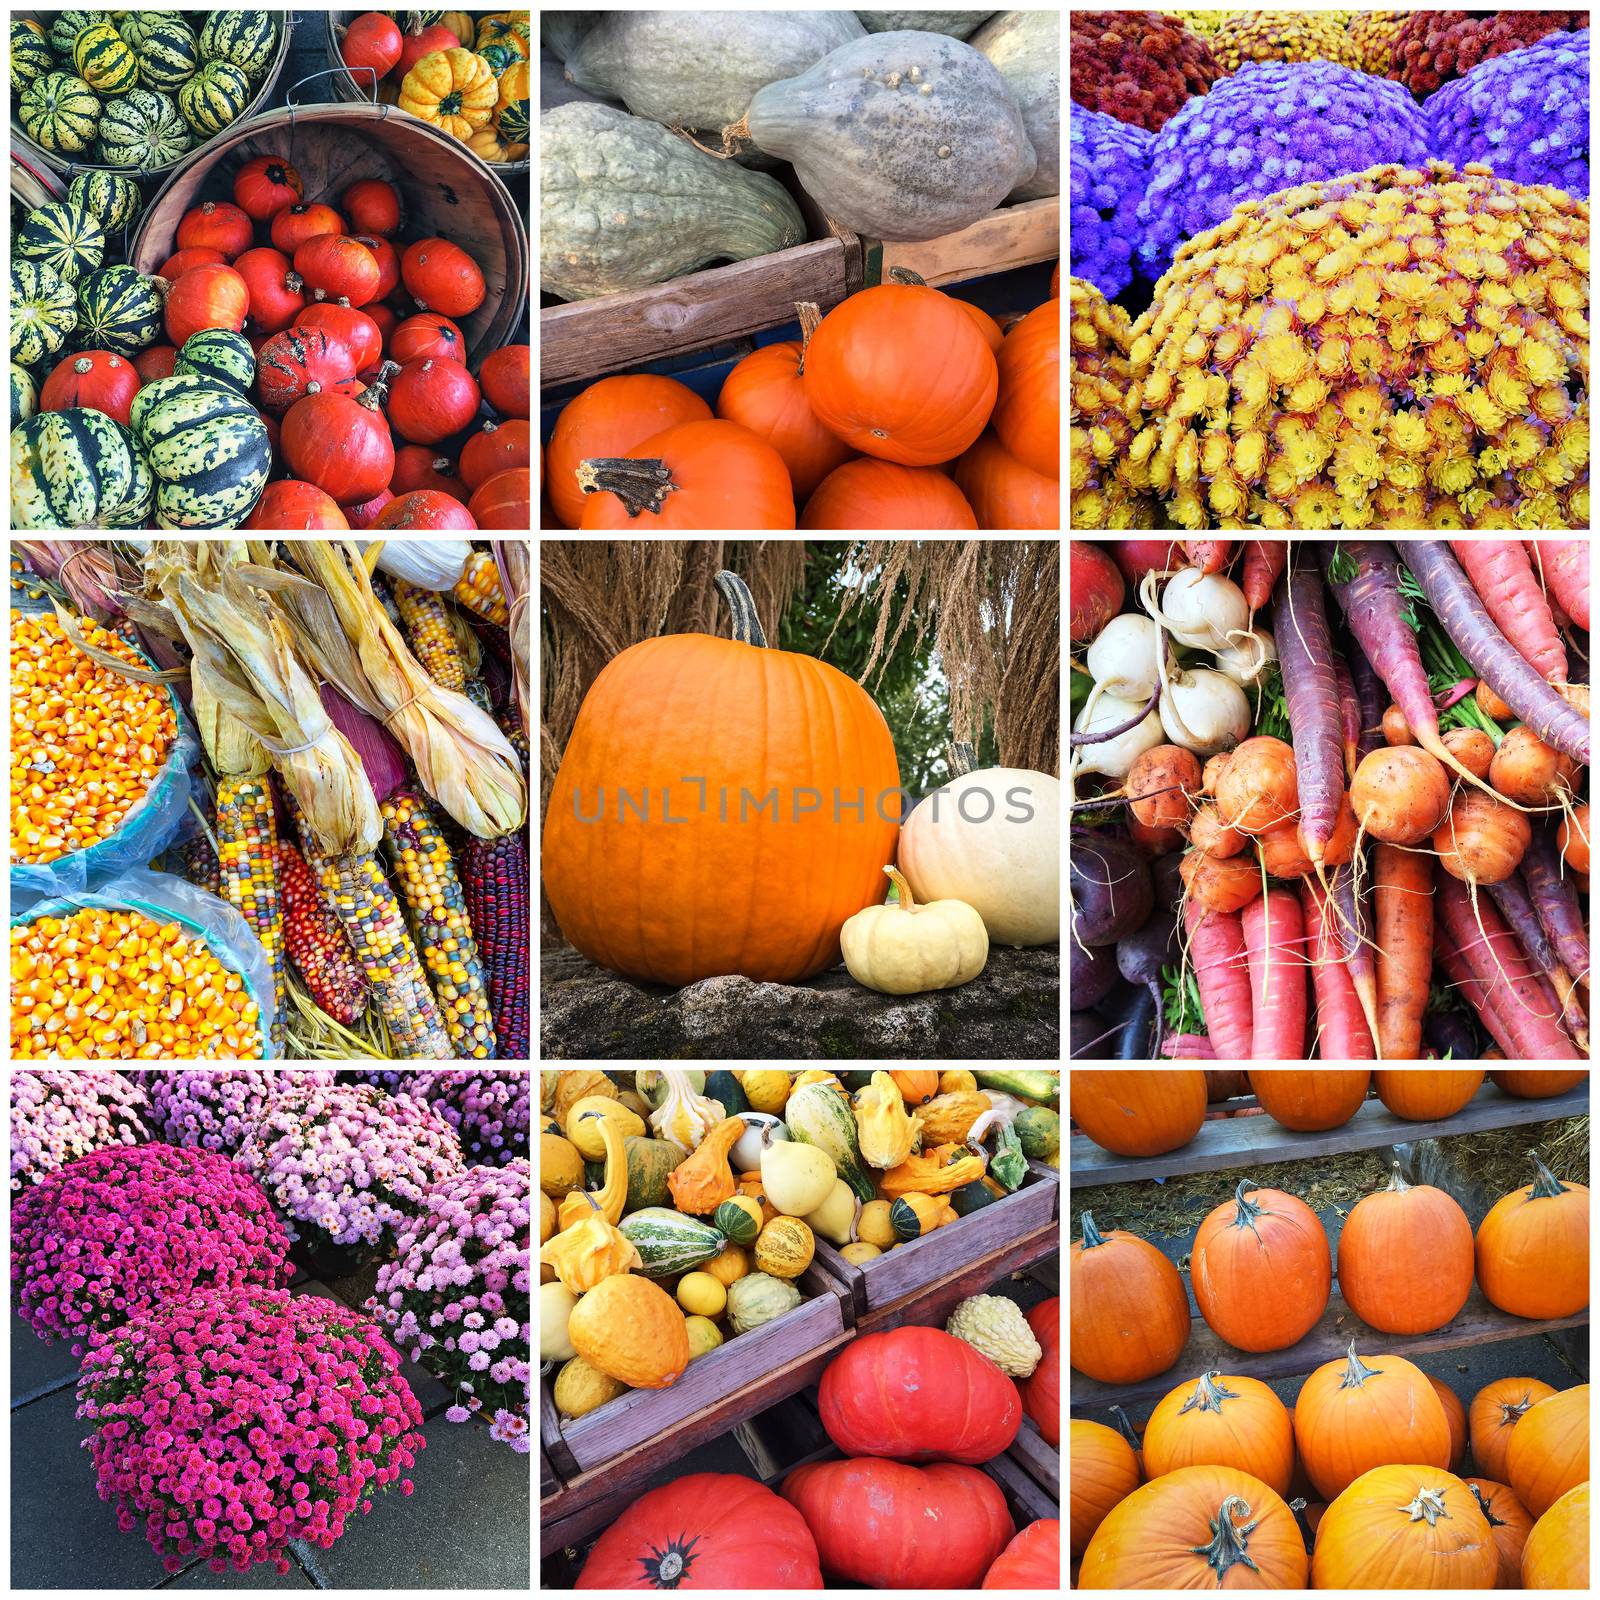 Autumn market. Vegetables and flowers, collage of nine photos.